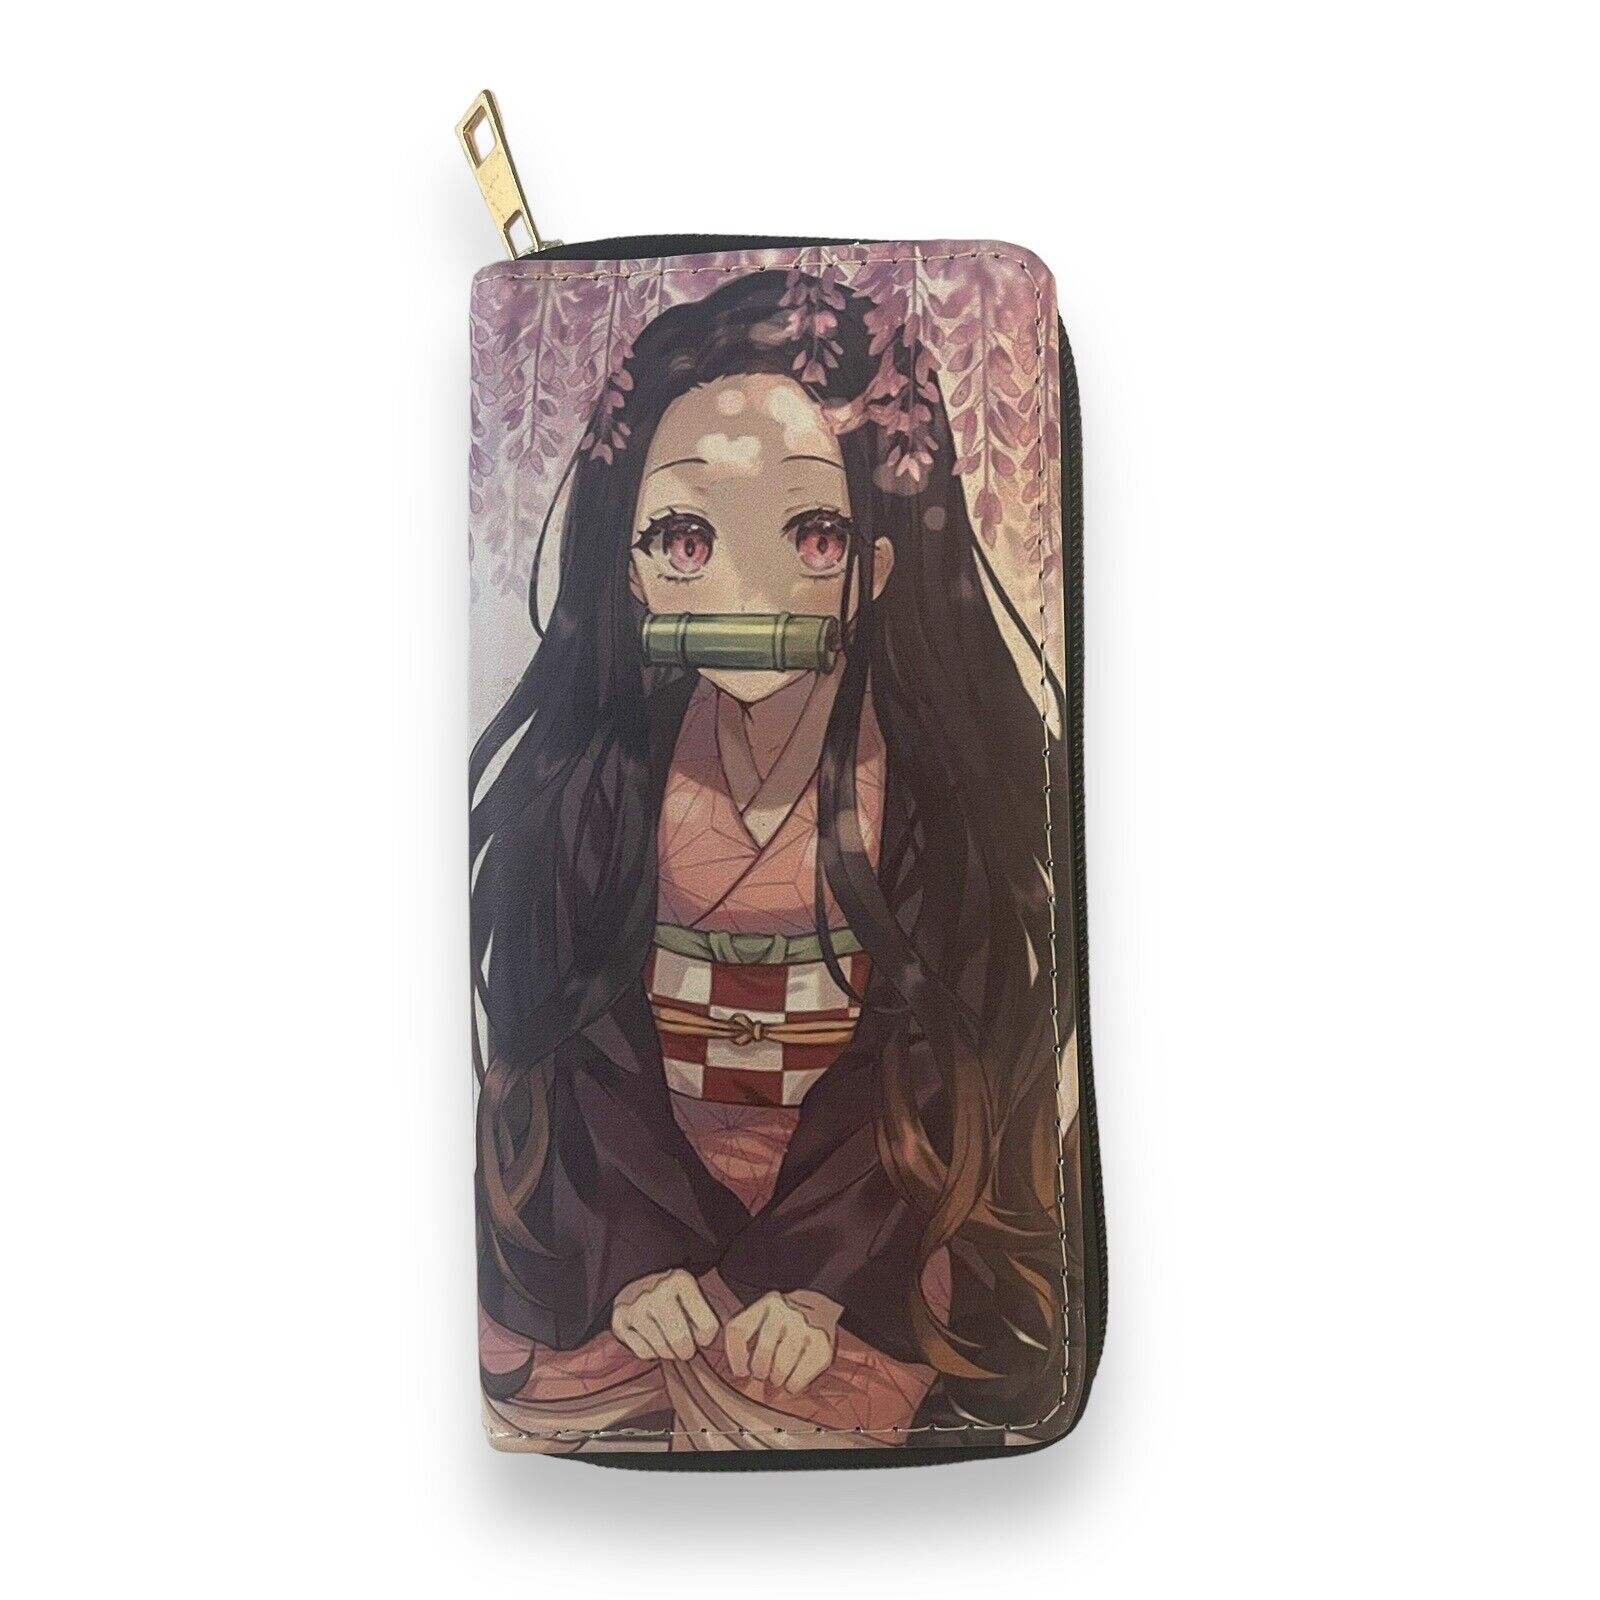 Demon Slayer Nezuko Wallet Women’s With Coin, Currency And Card Slots NWOT.